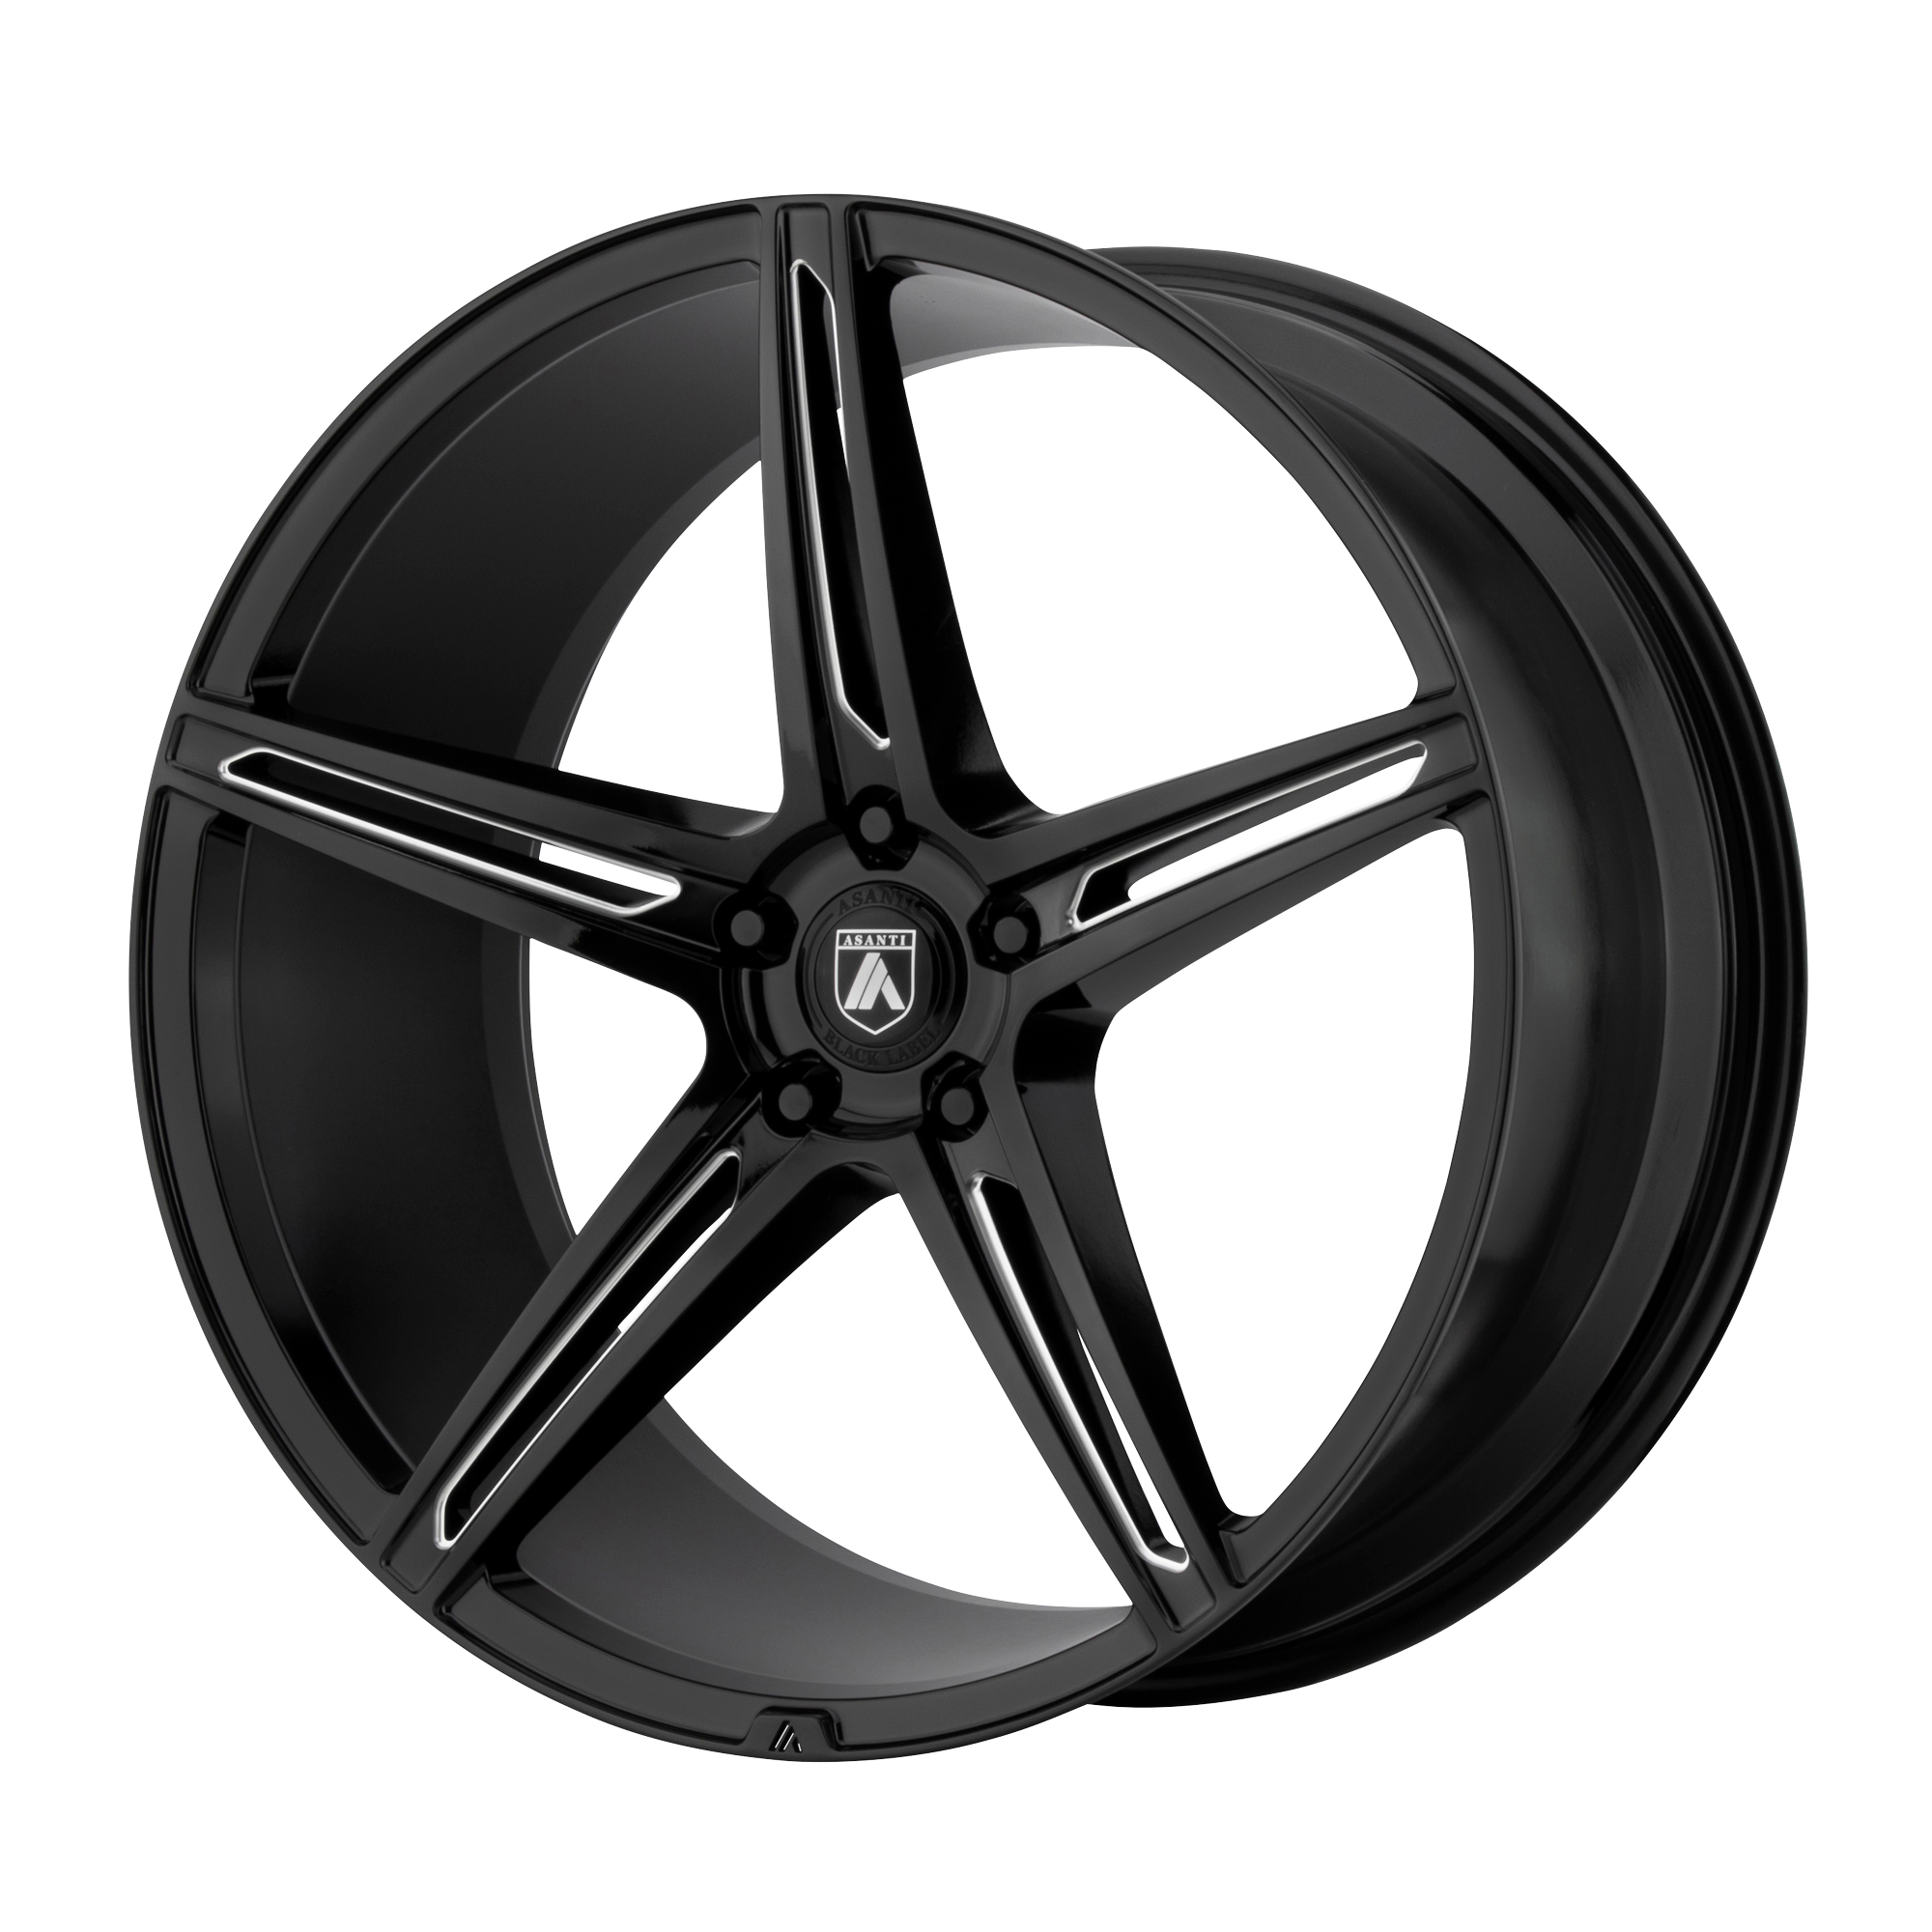 ALPHA 5 20x9 5x115.00 GLOSS BLACK MILLED (15 mm) - Tires and Engine Performance